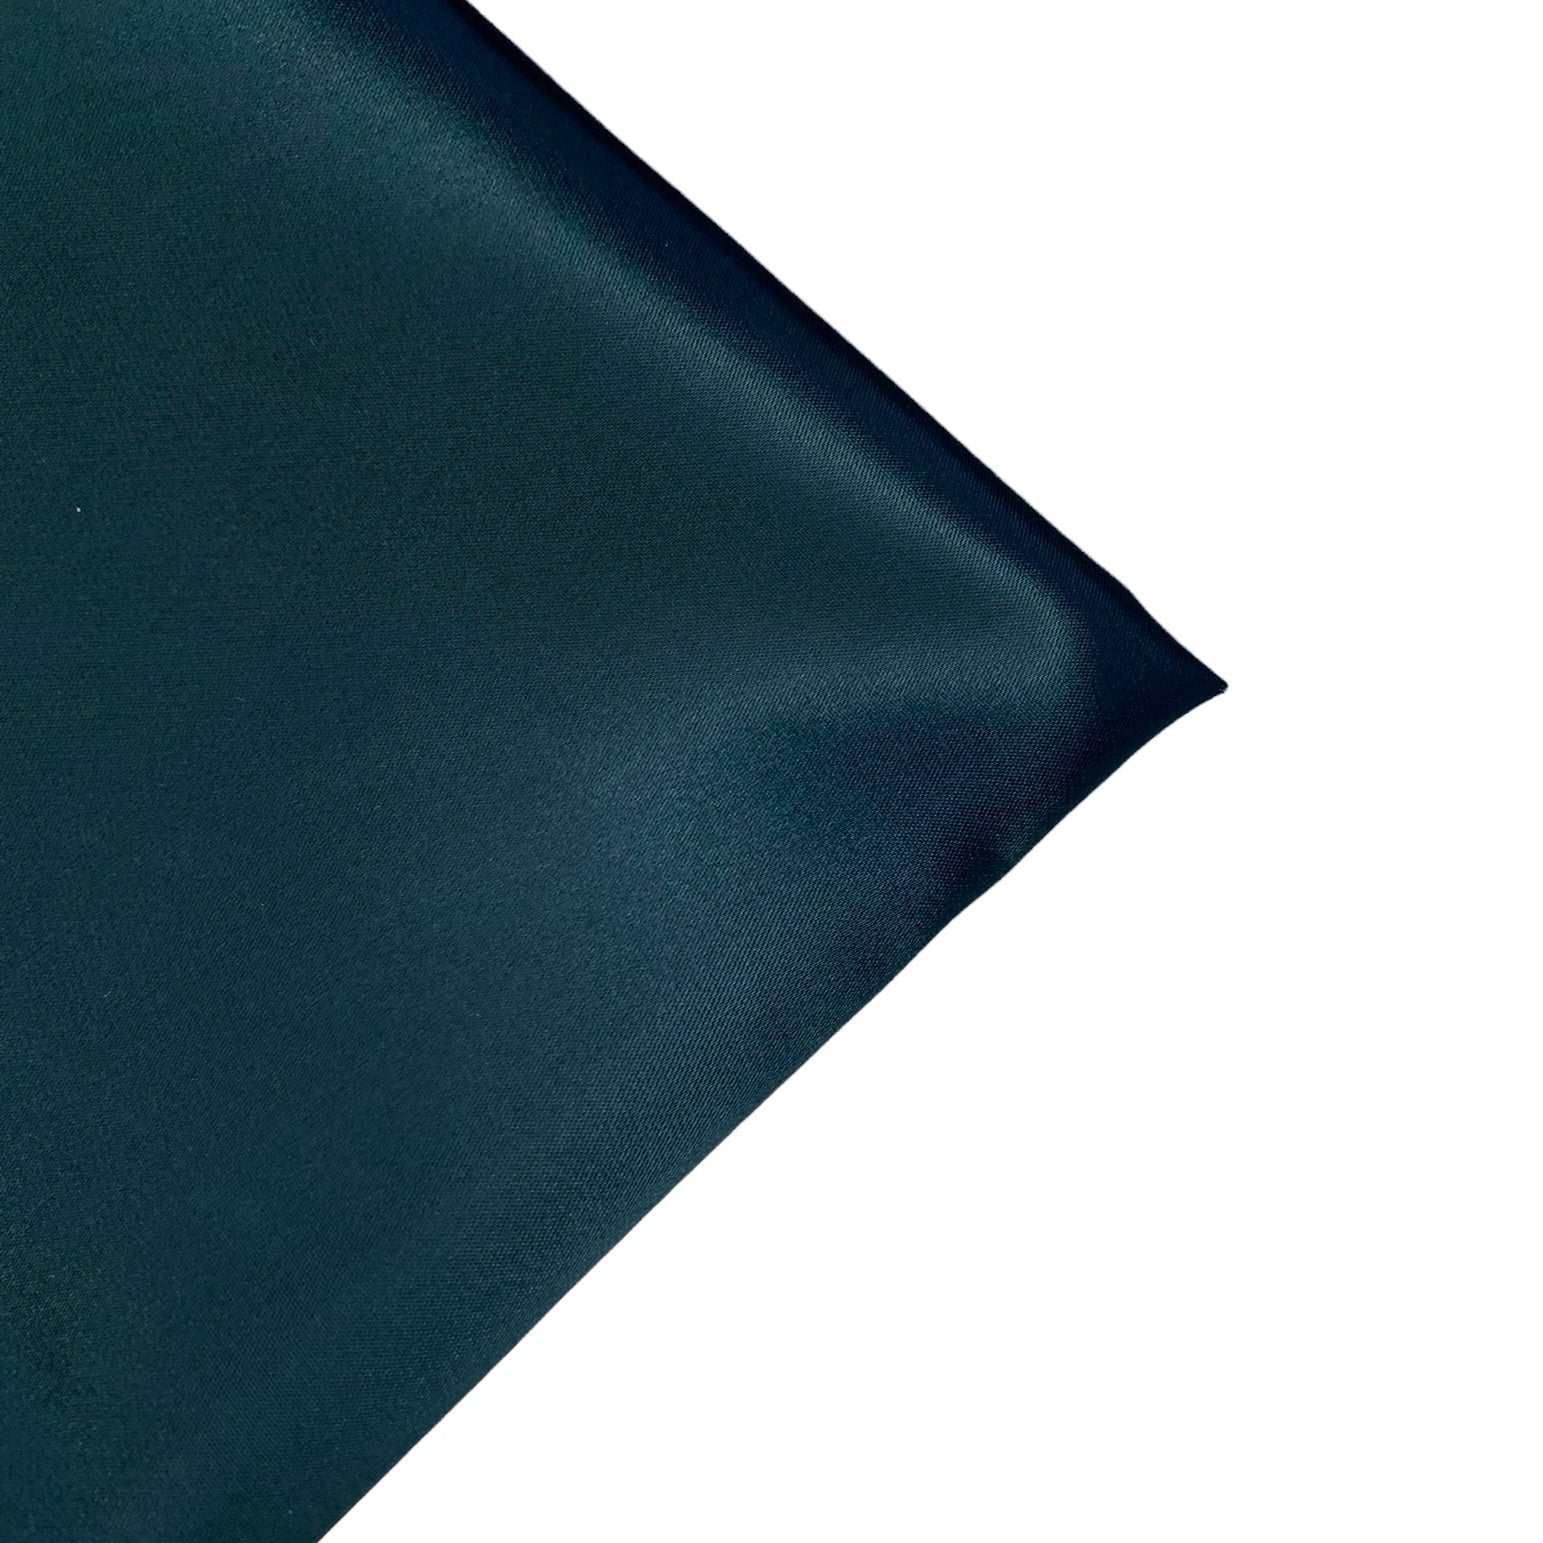 Polyester Satin - 44” - Baby Blue